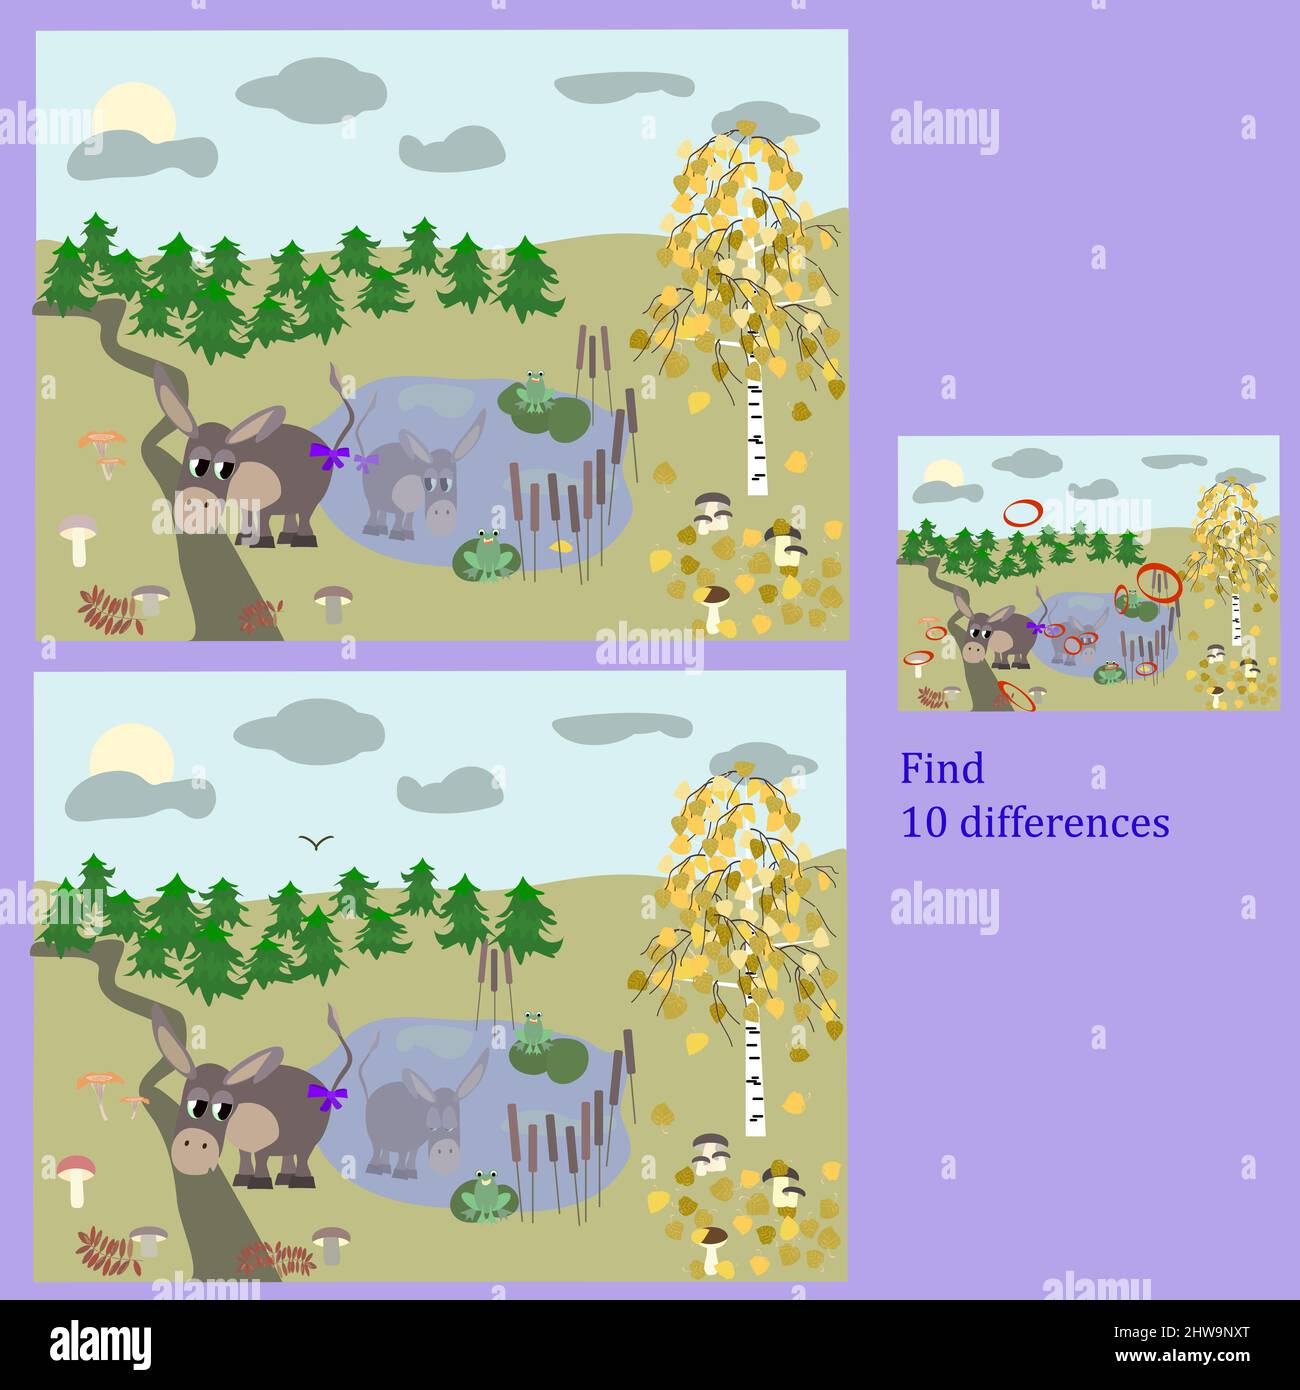 ind 10 differences rebus for children under 6 years old Stock Vector